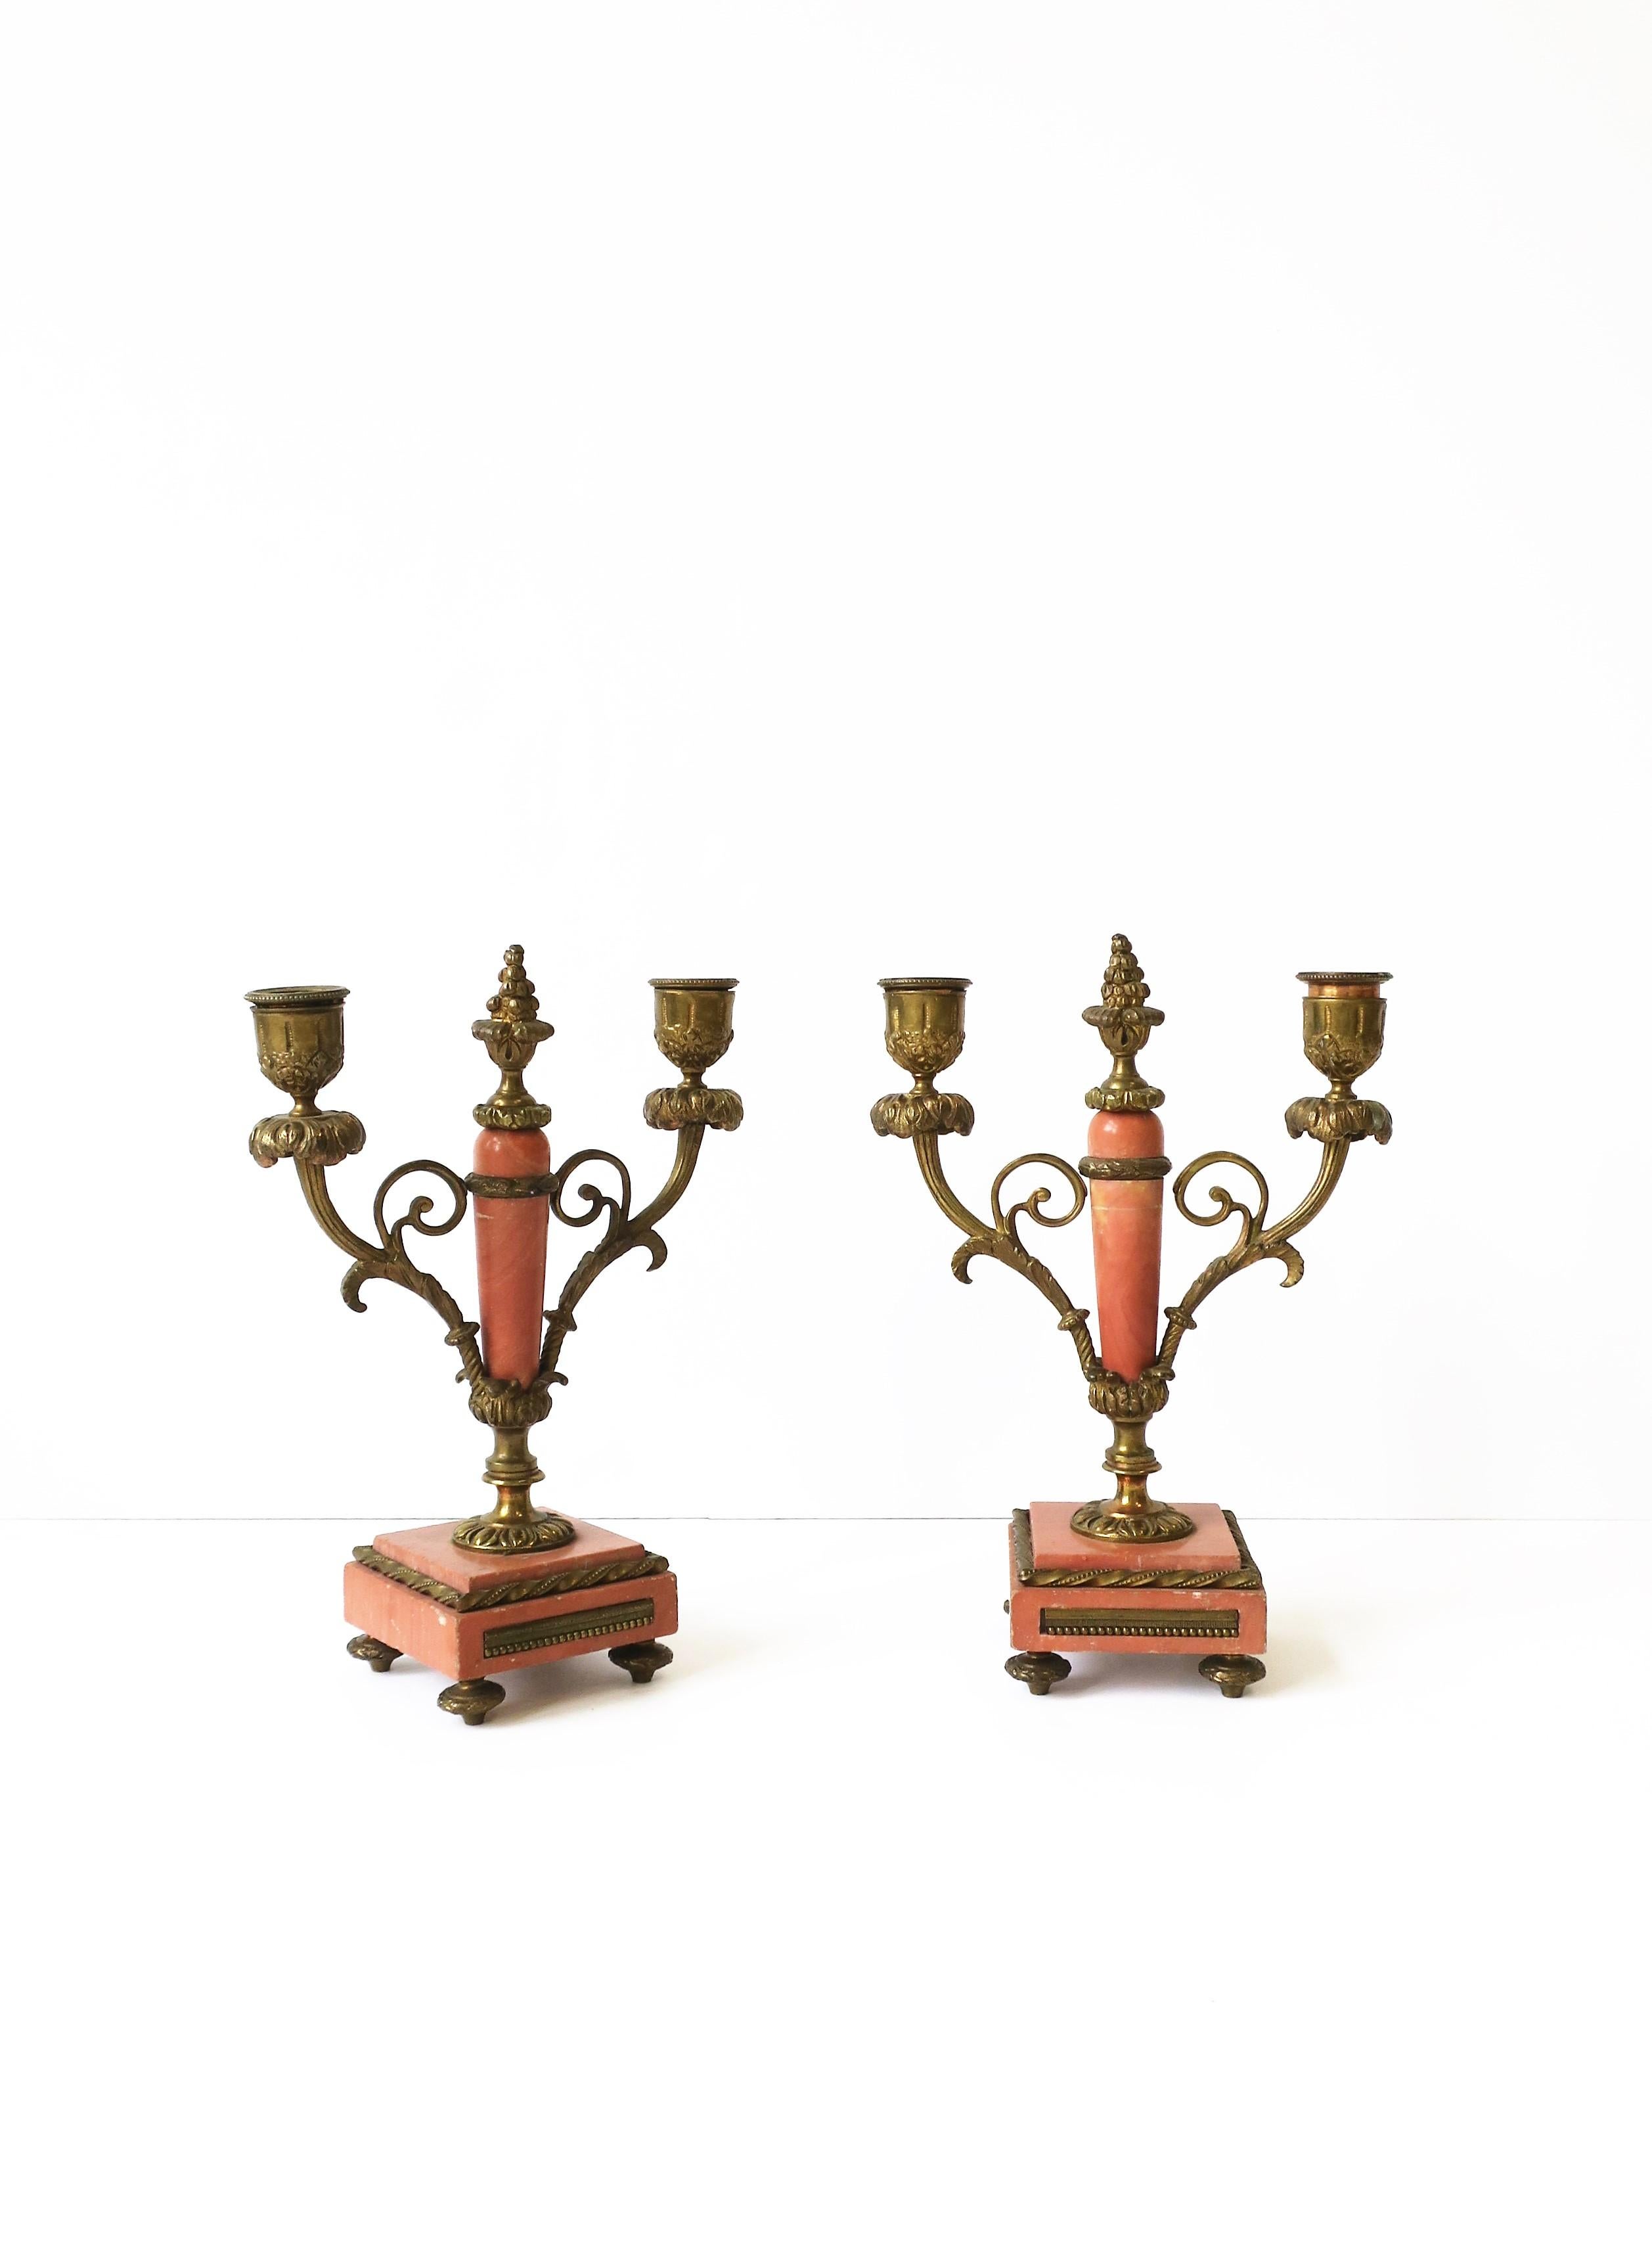 French Marble & Gold Brass Candlestick or Candelabra Holders, 19th c, Pair 1